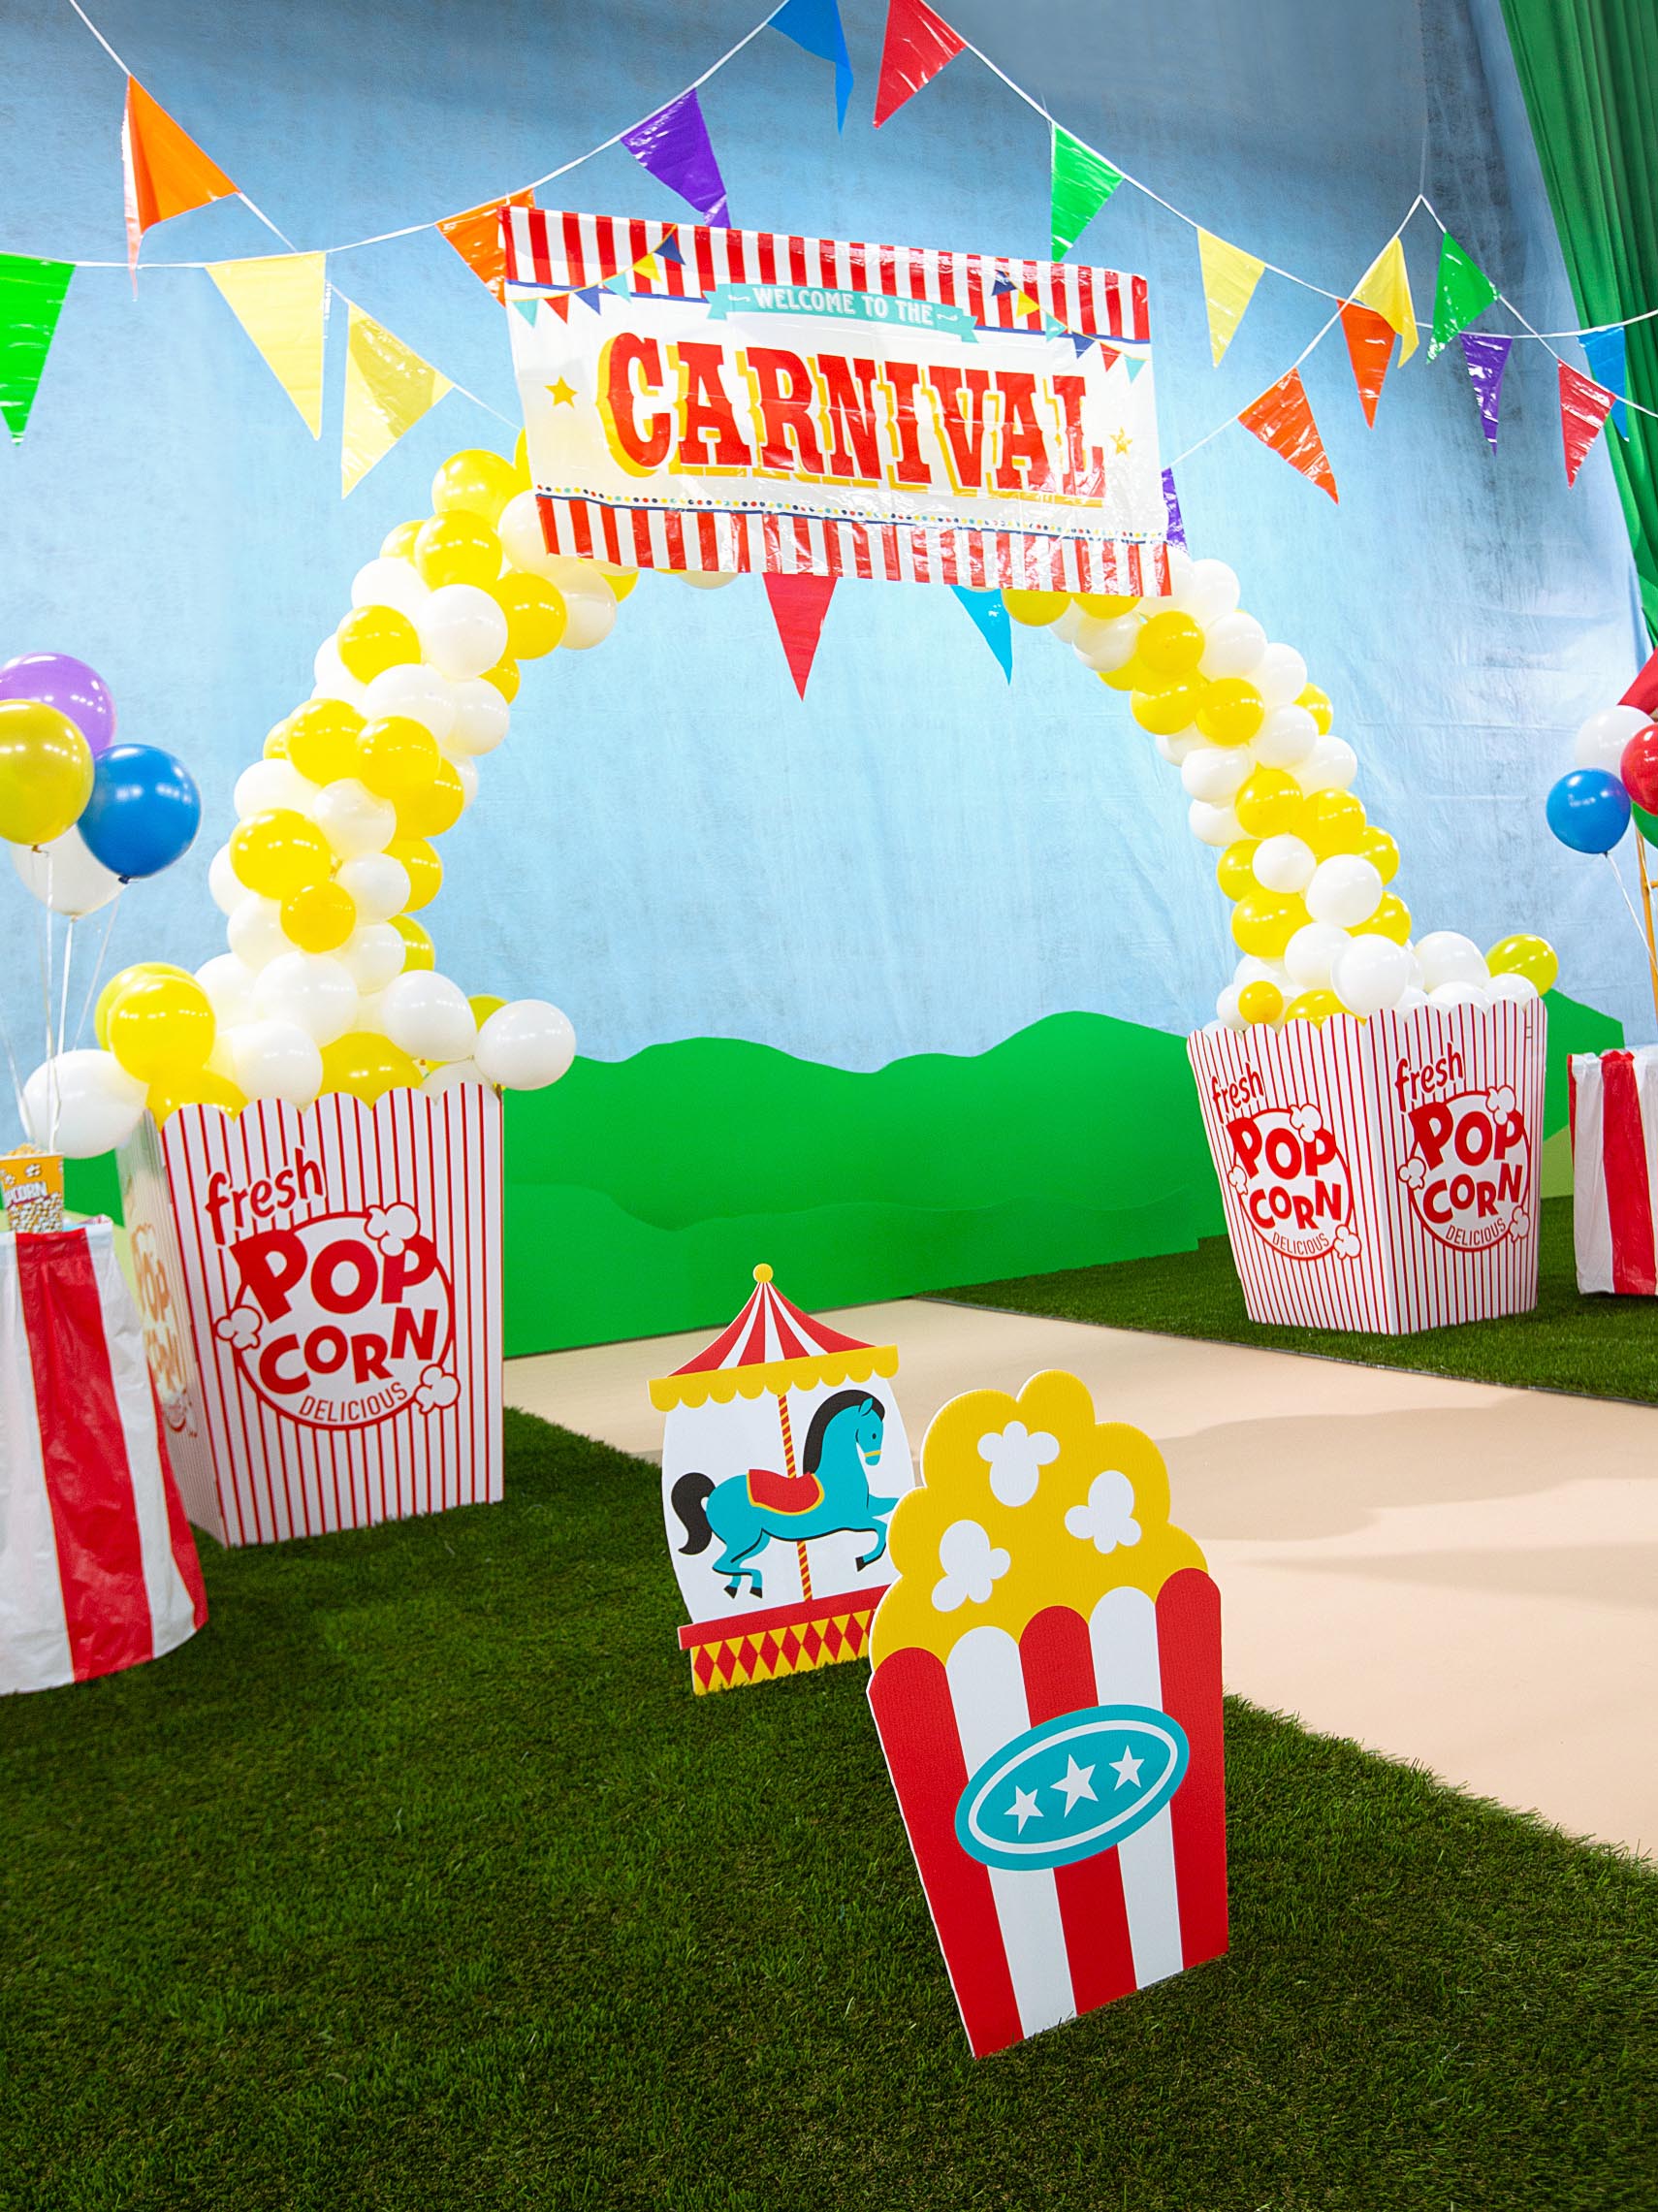 DIY Carnival: tips for decorations and costumes